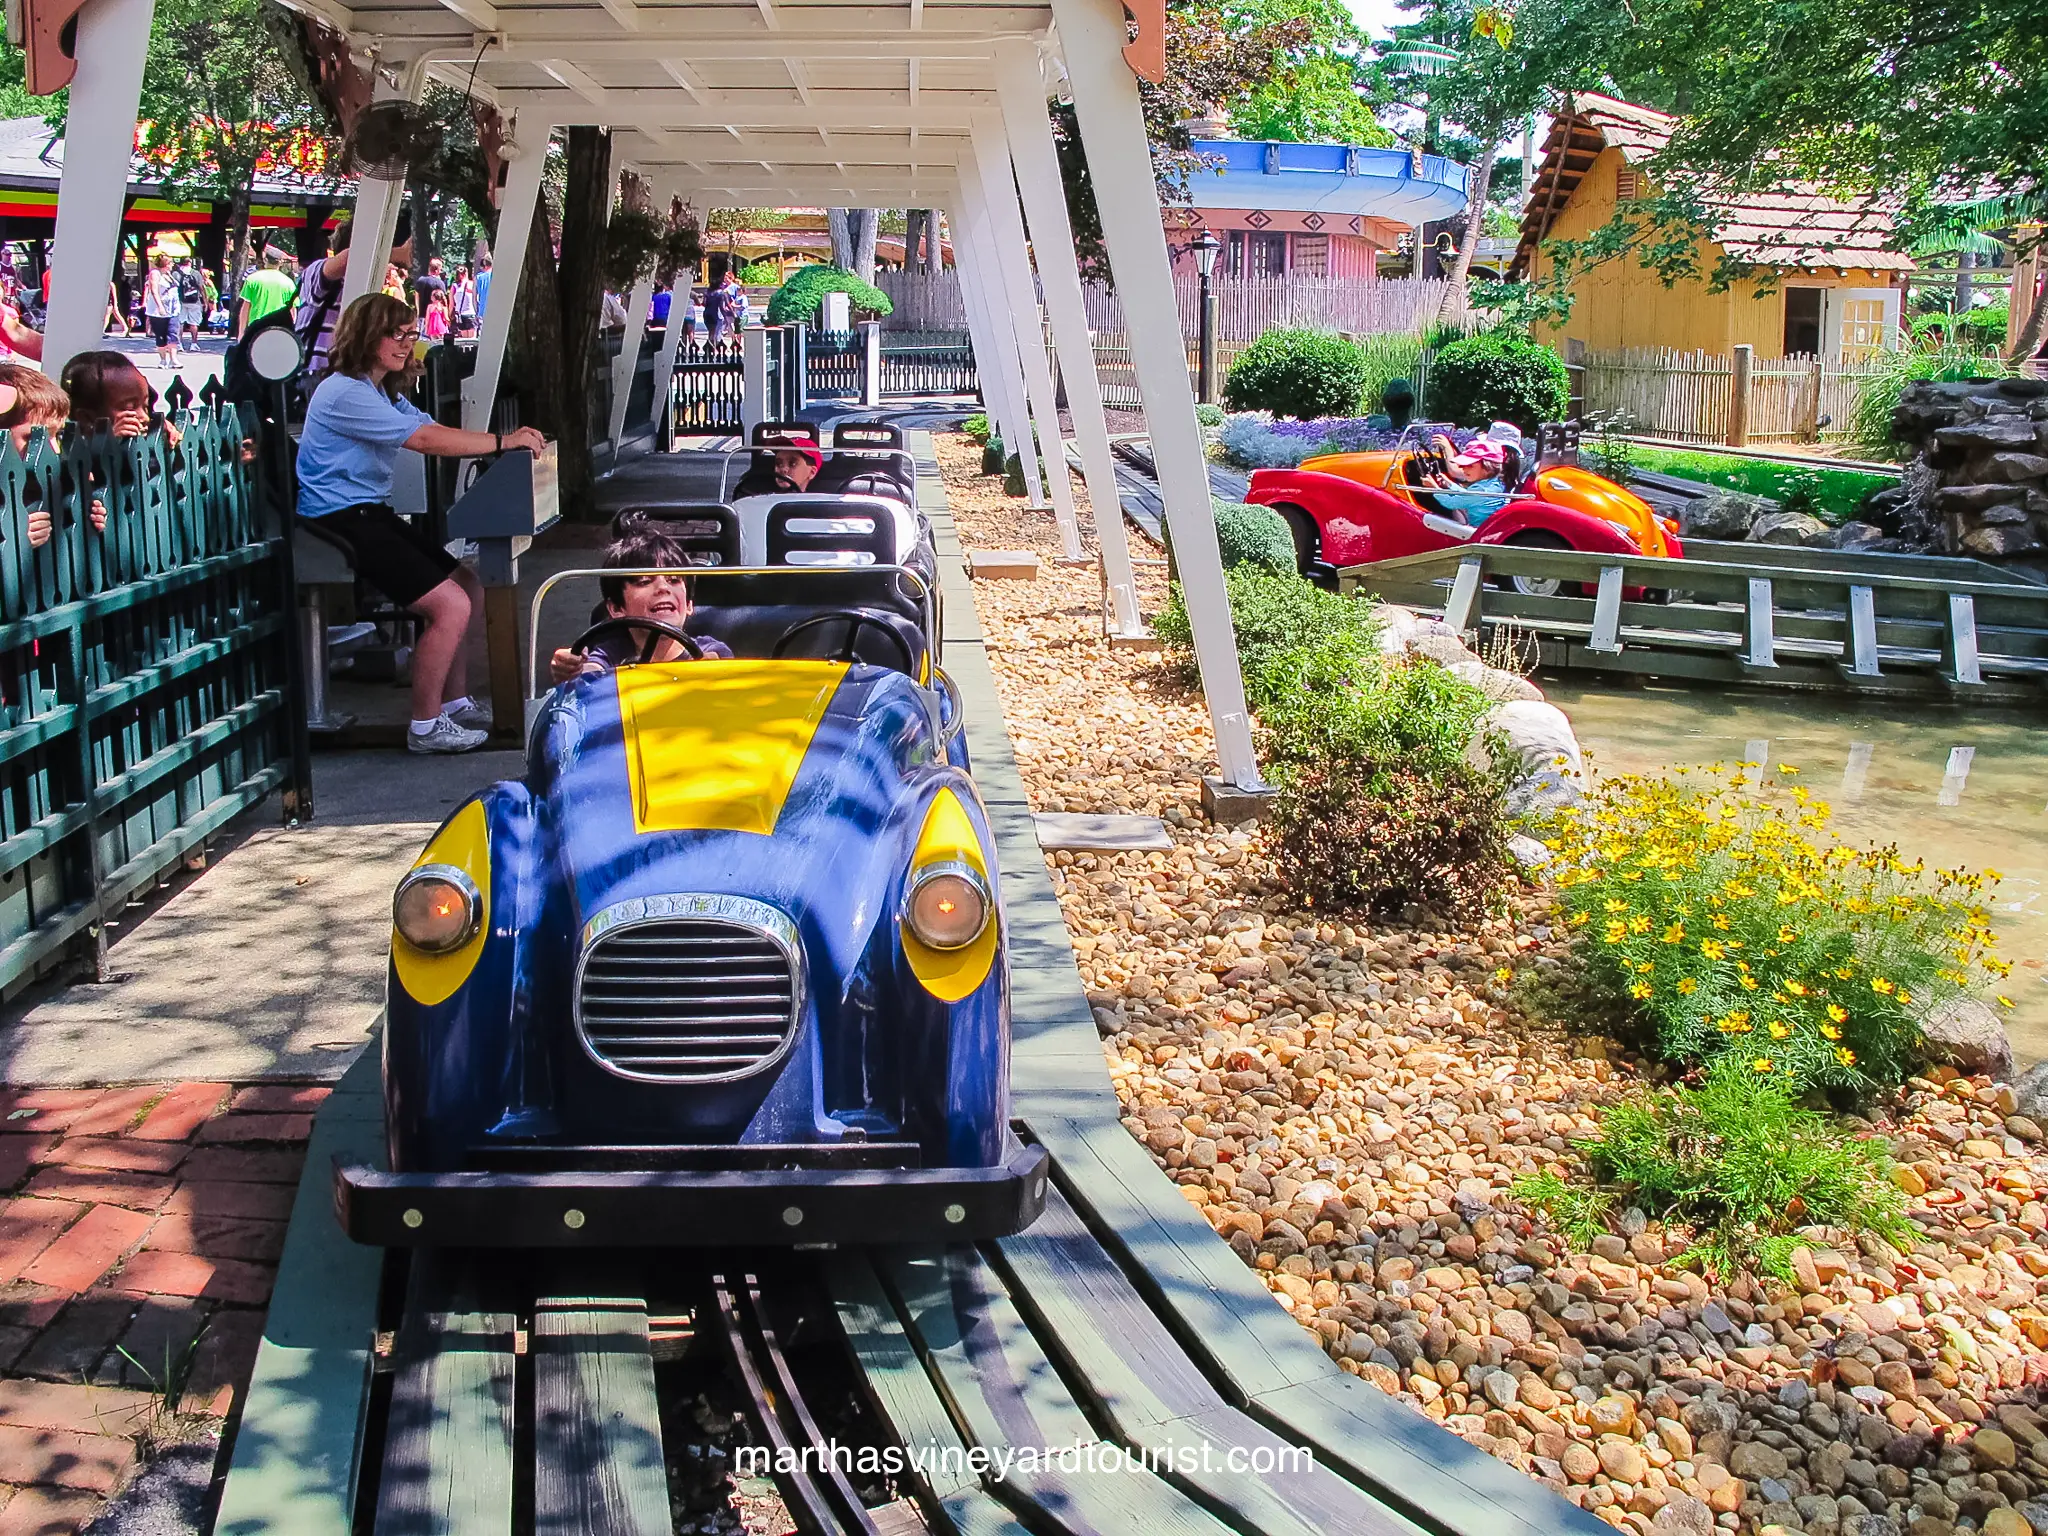 a small child train ride at Canobie Lake Park